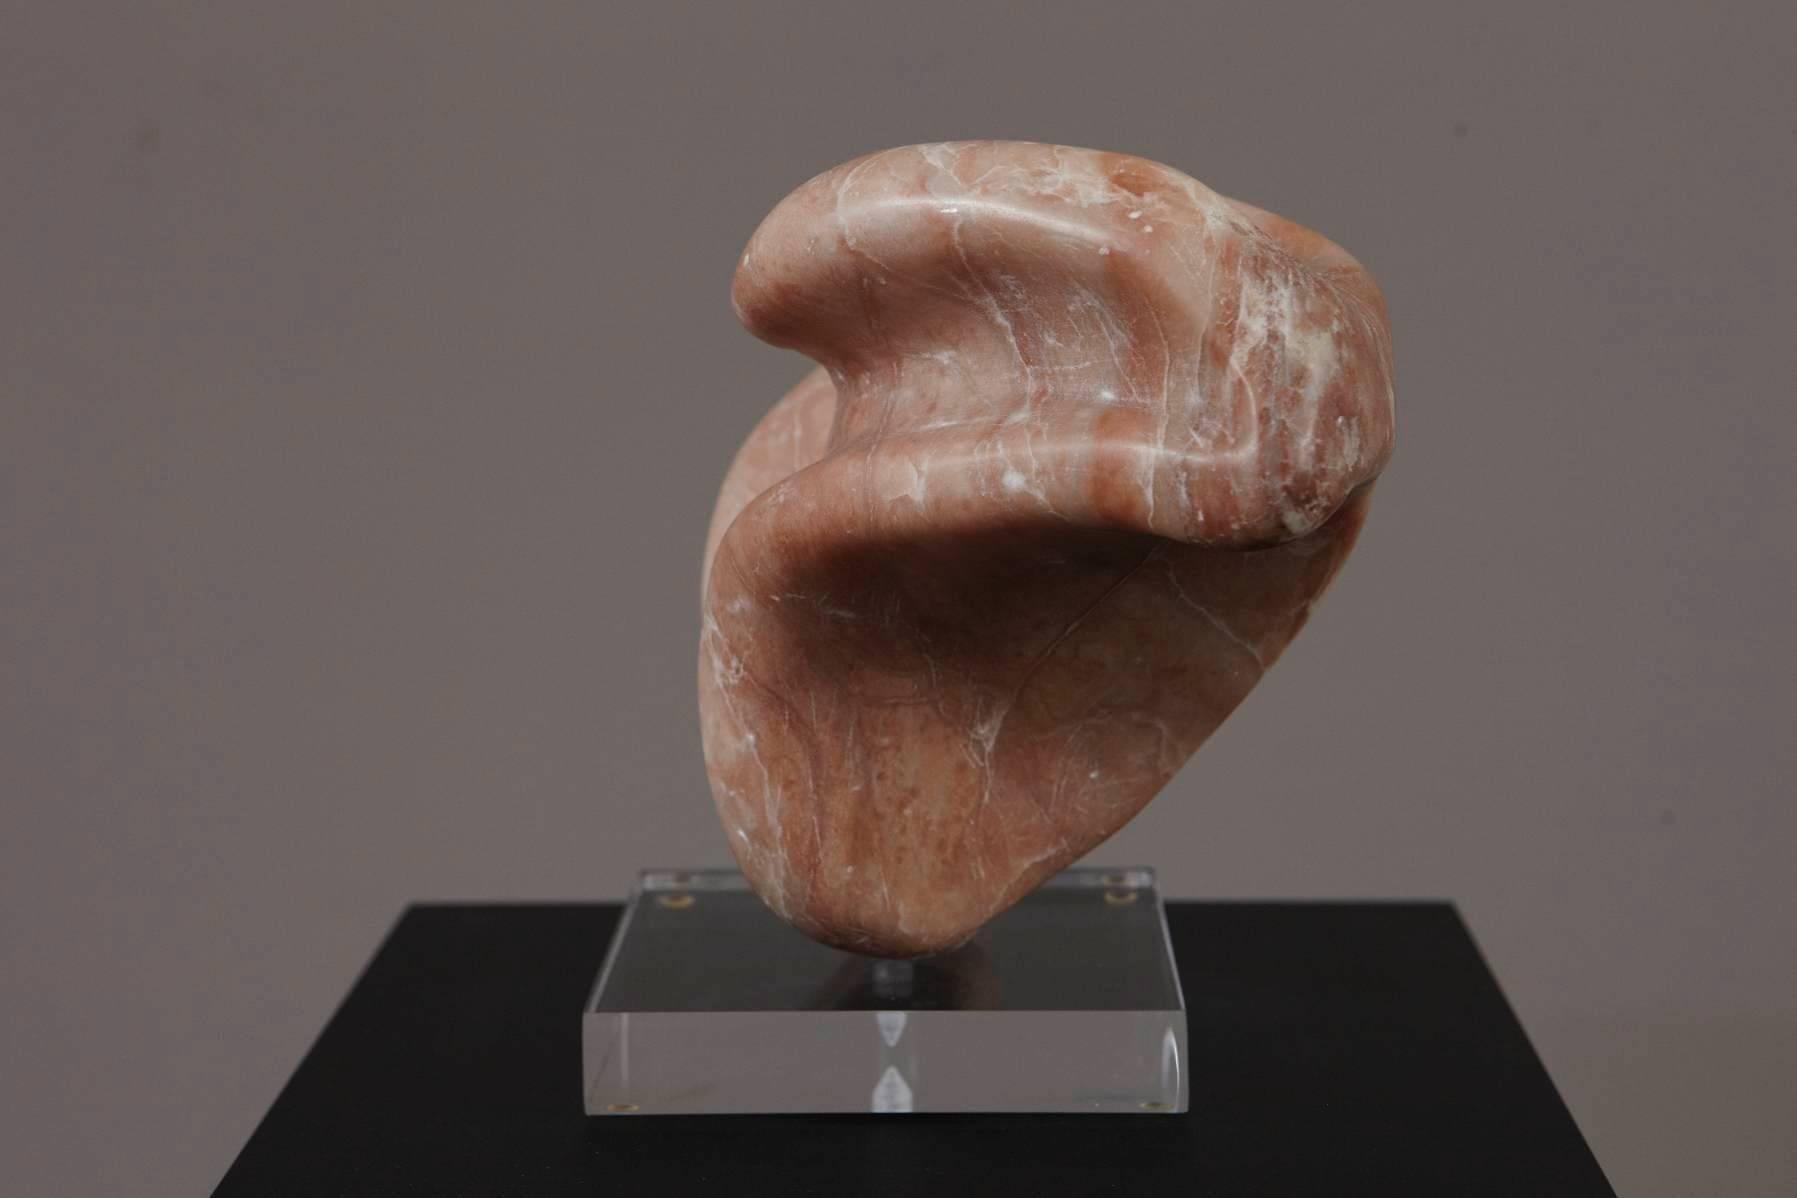 Free-form, abstract polished Portuguese pink marble sculpture on Lucite base.
The Lucite base is solid and large enough, that the sculpture can be turned in different directions without tilting. Marble and Lucite in very good condition.